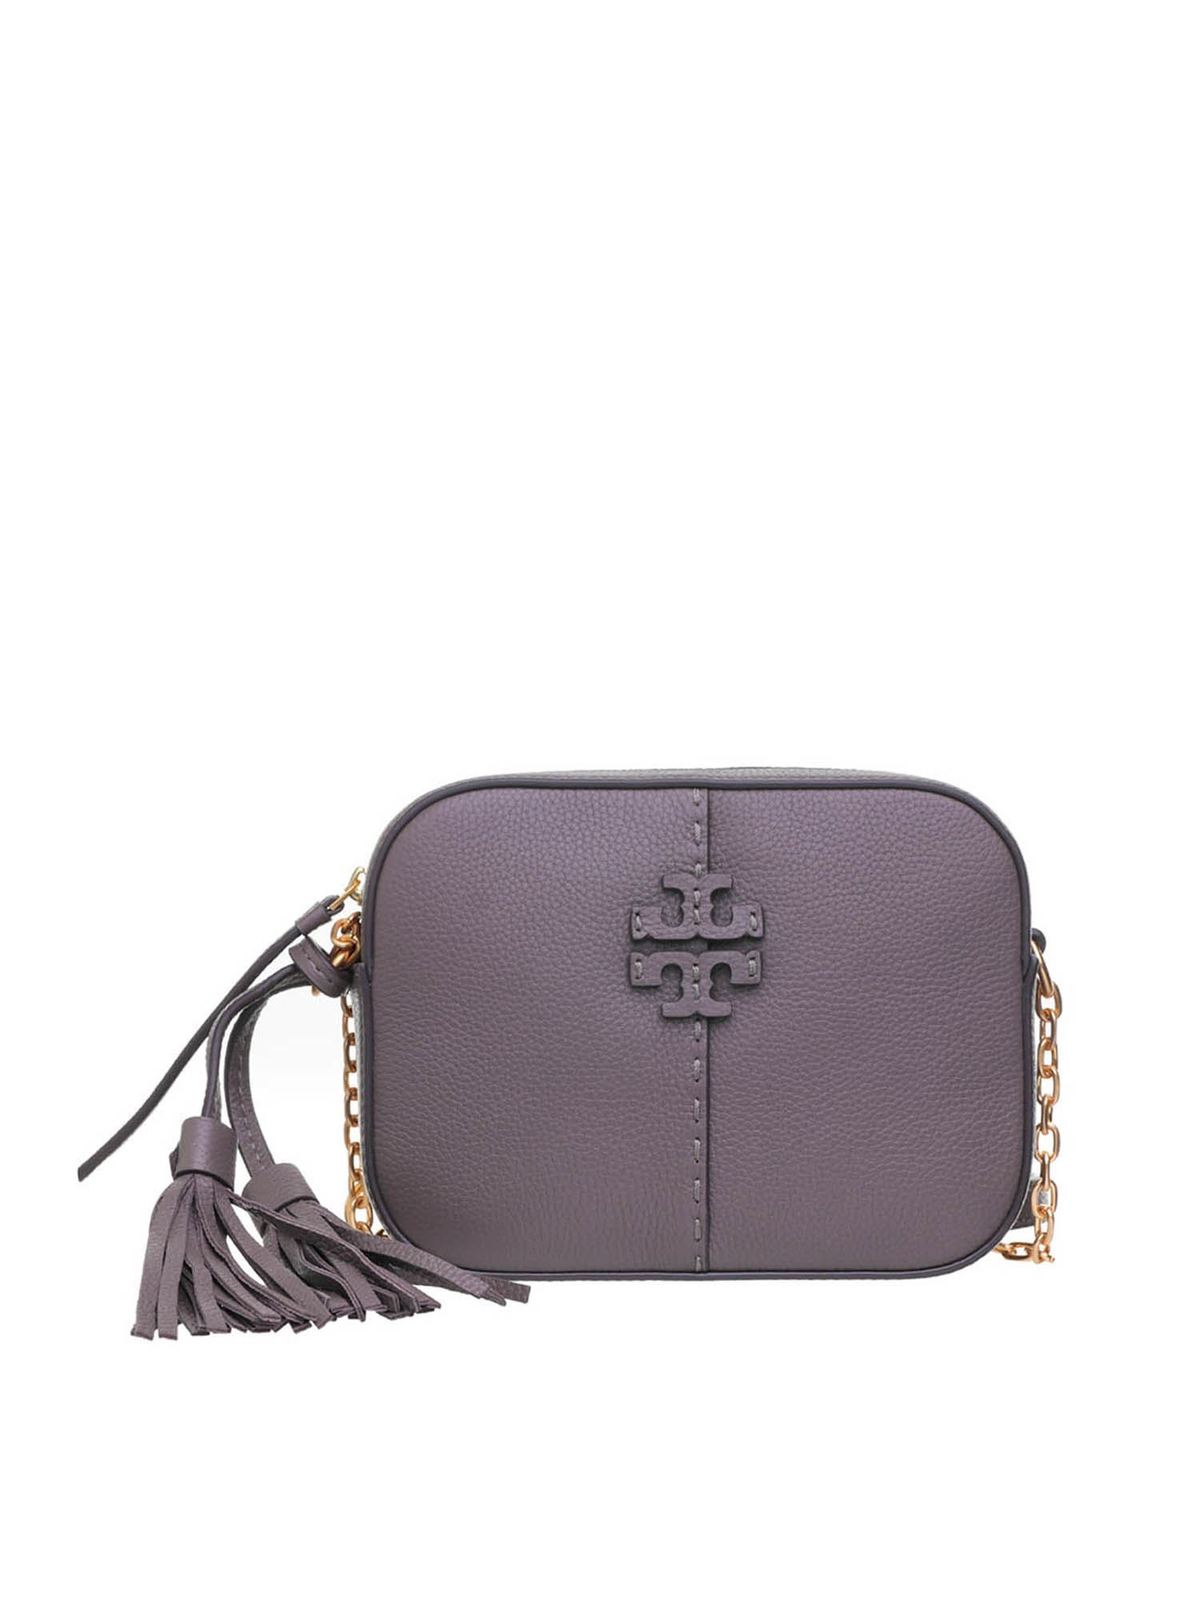 Cross body bags Tory Burch - McGraw camera bag in Silver Maple color -  64447963